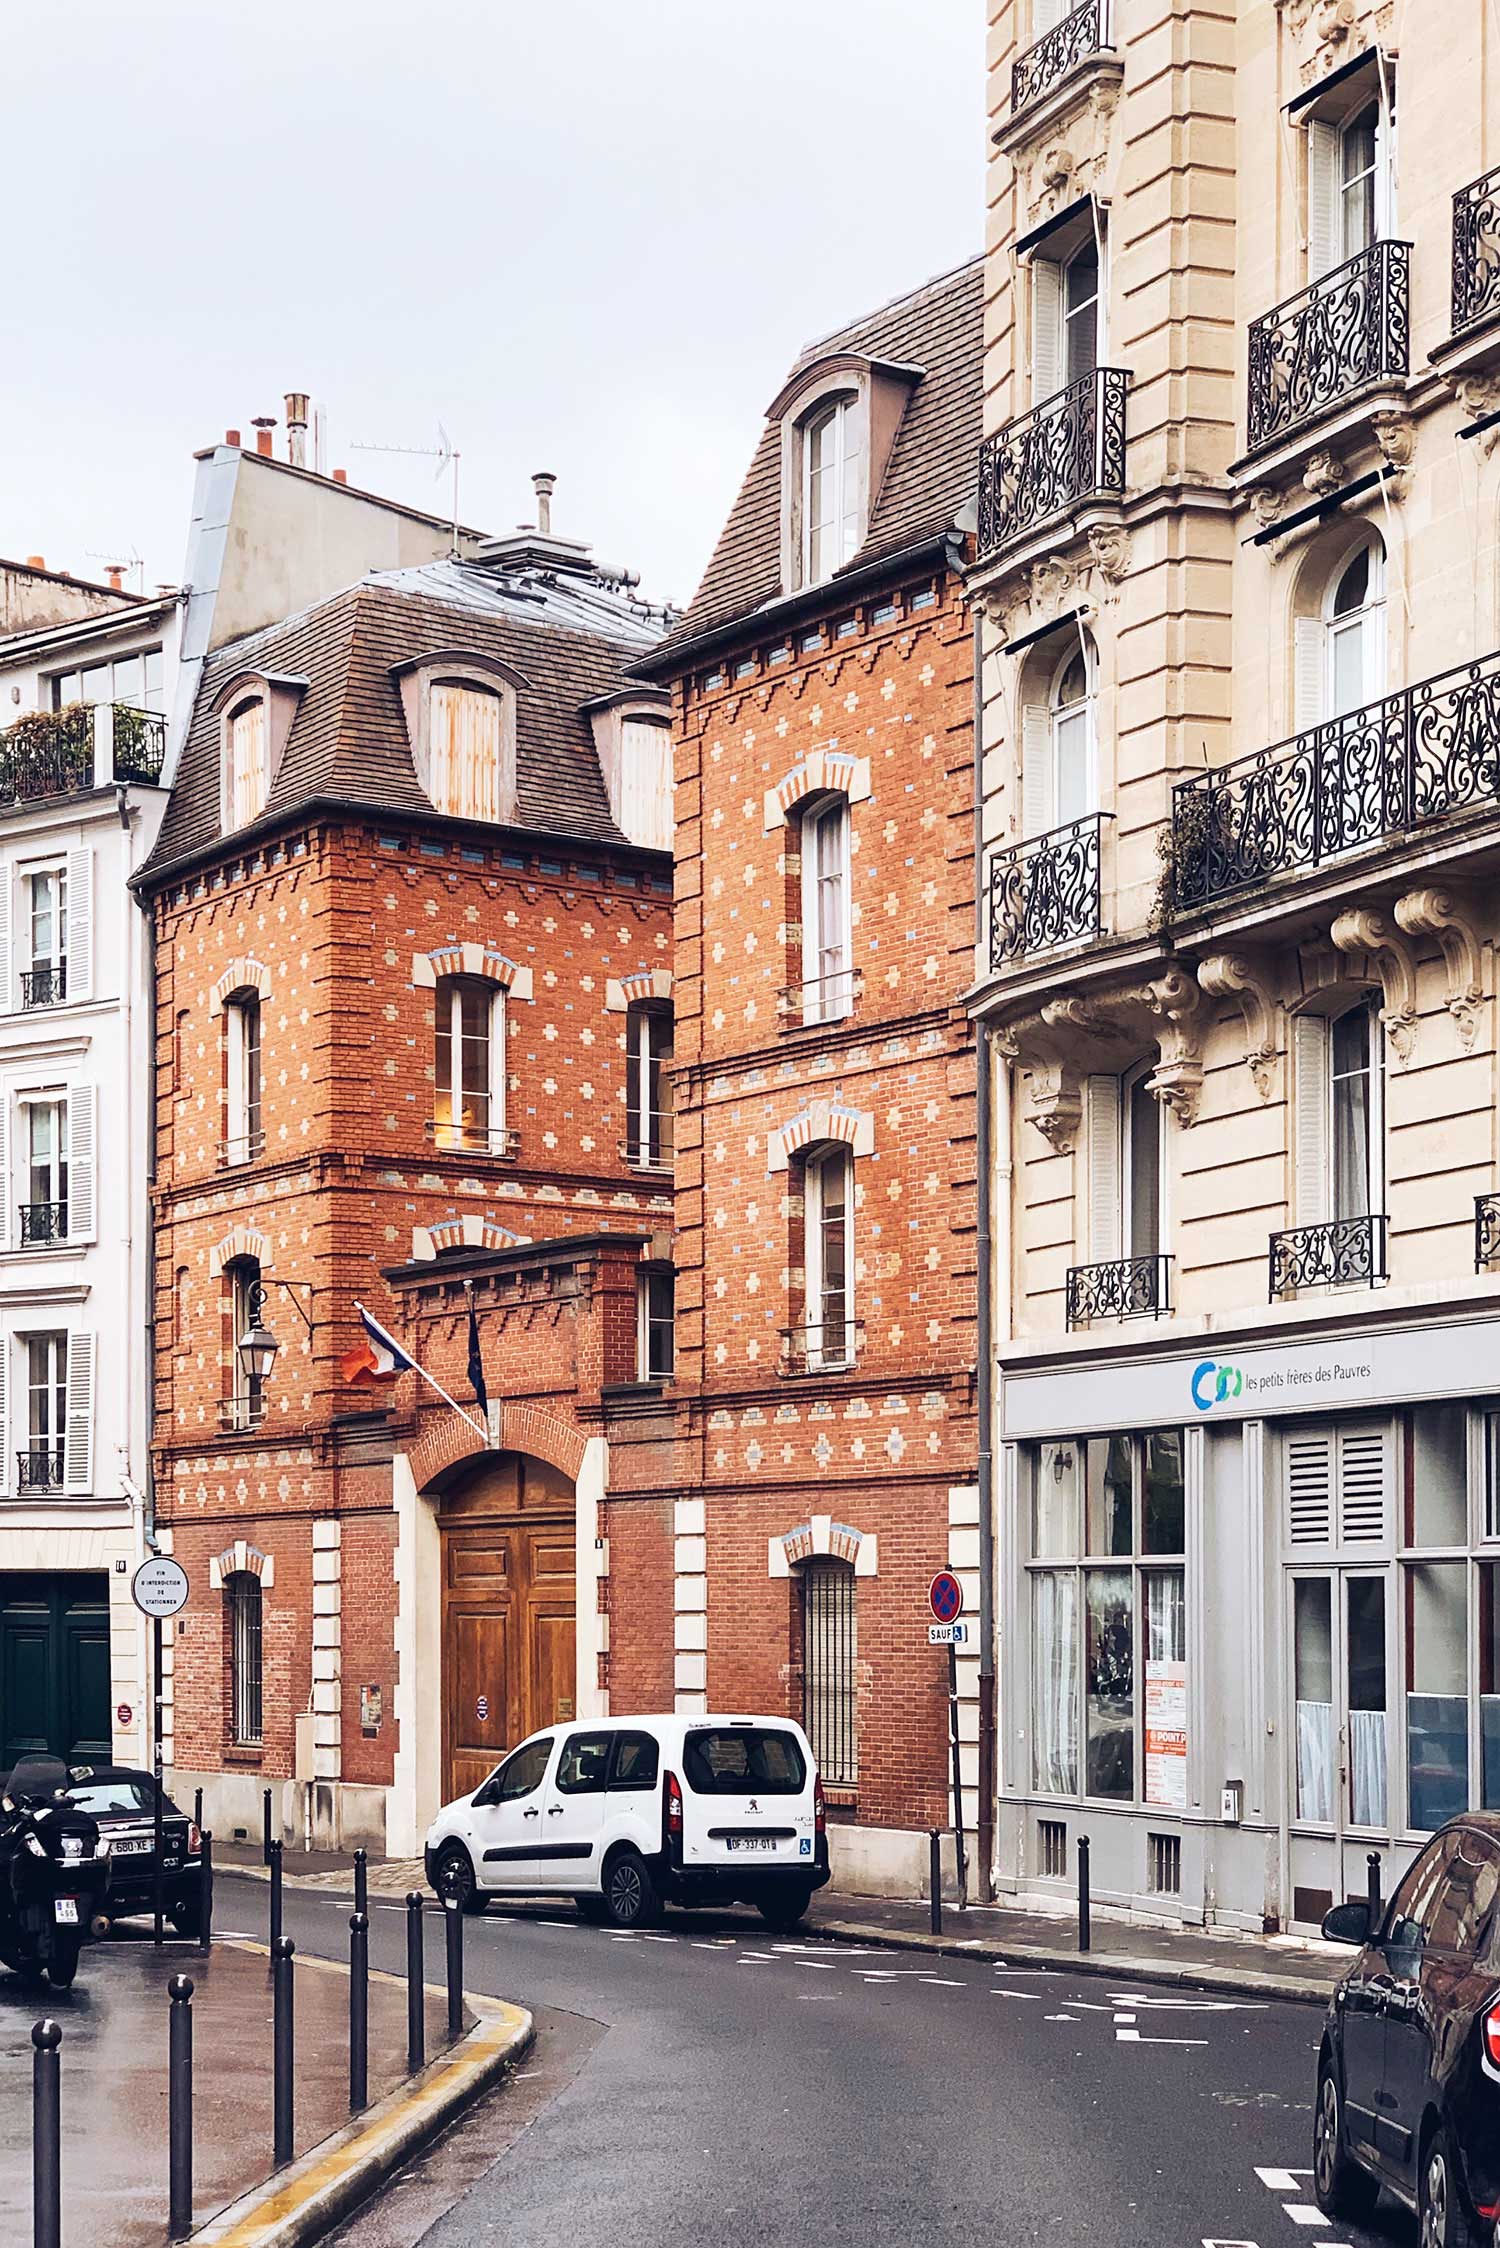 Oui Oui These Are The Best Airbnbs In Paris Balcony Views Etc